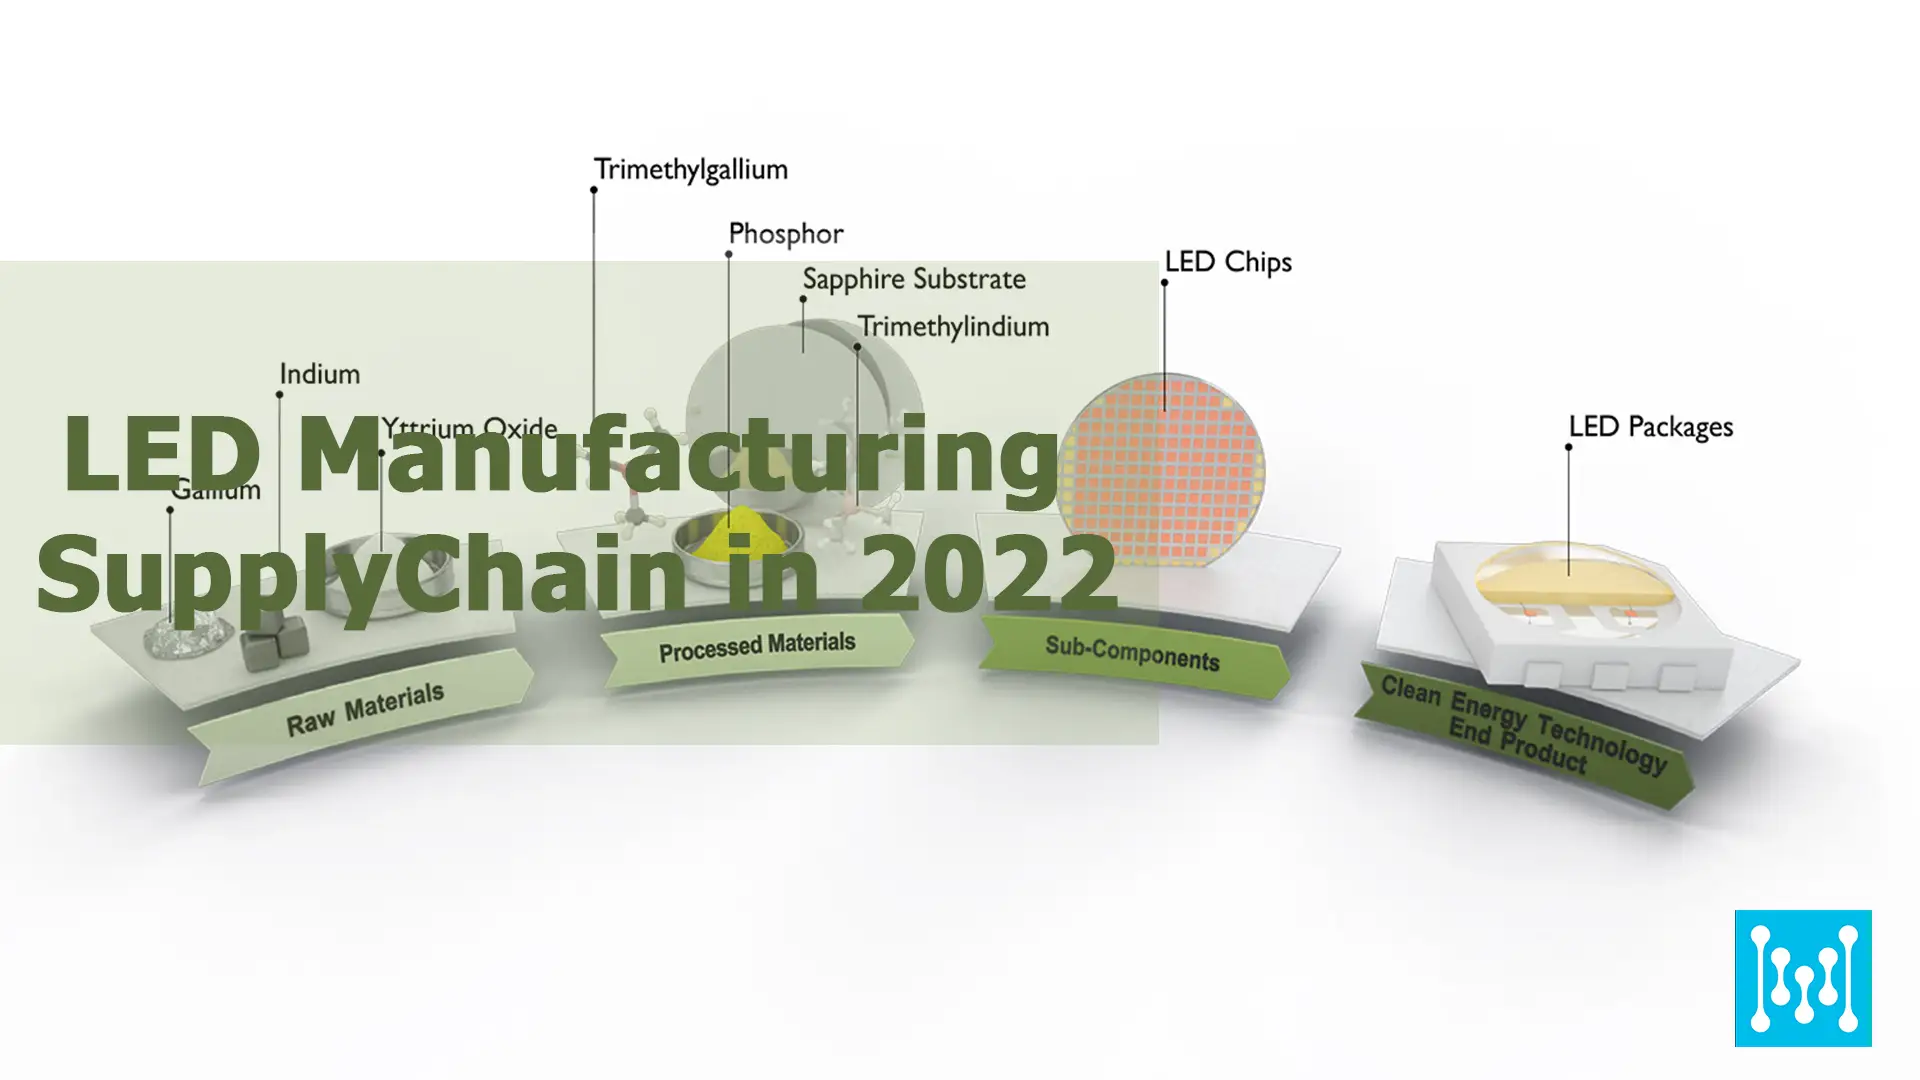 LED Manufacturing Supply Chain in 2022